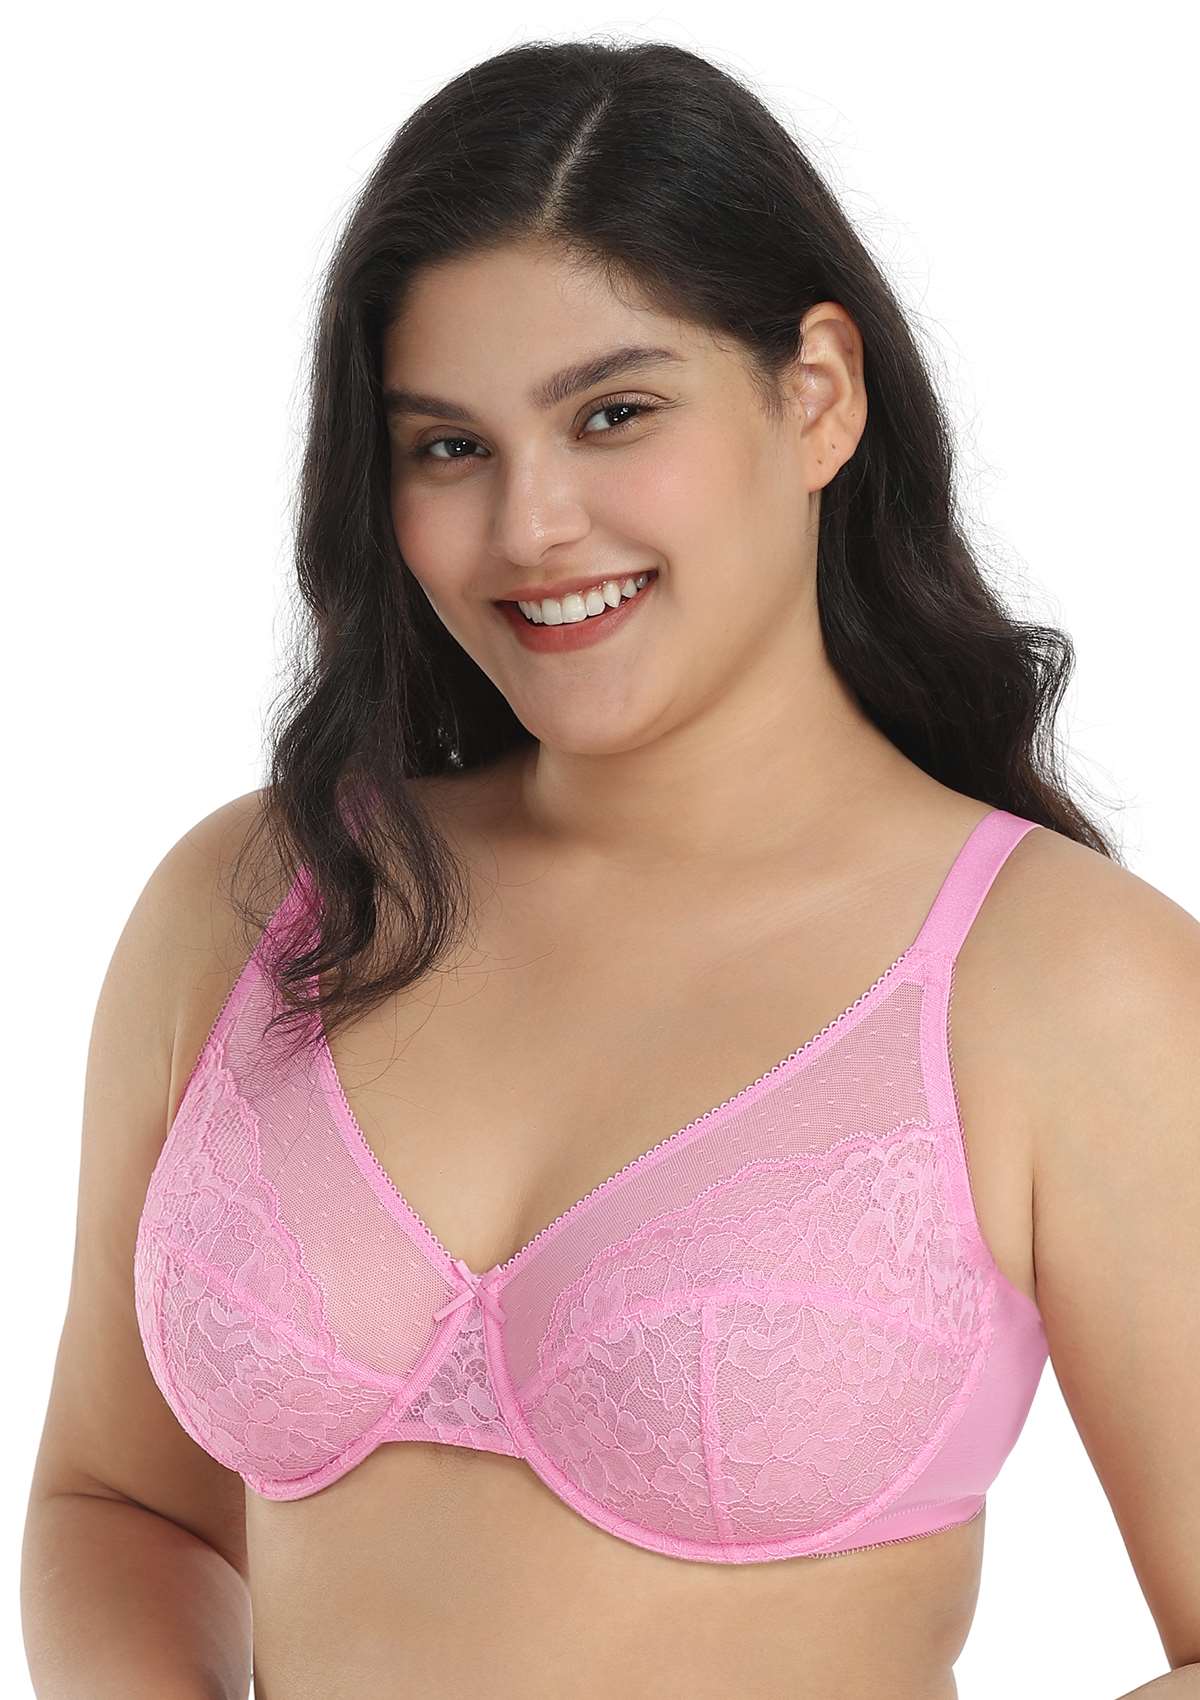 HSIA Enchante Lacy Bra: Comfy Sheer Lace Bra With Lift - Pink / 42 / DDD/F